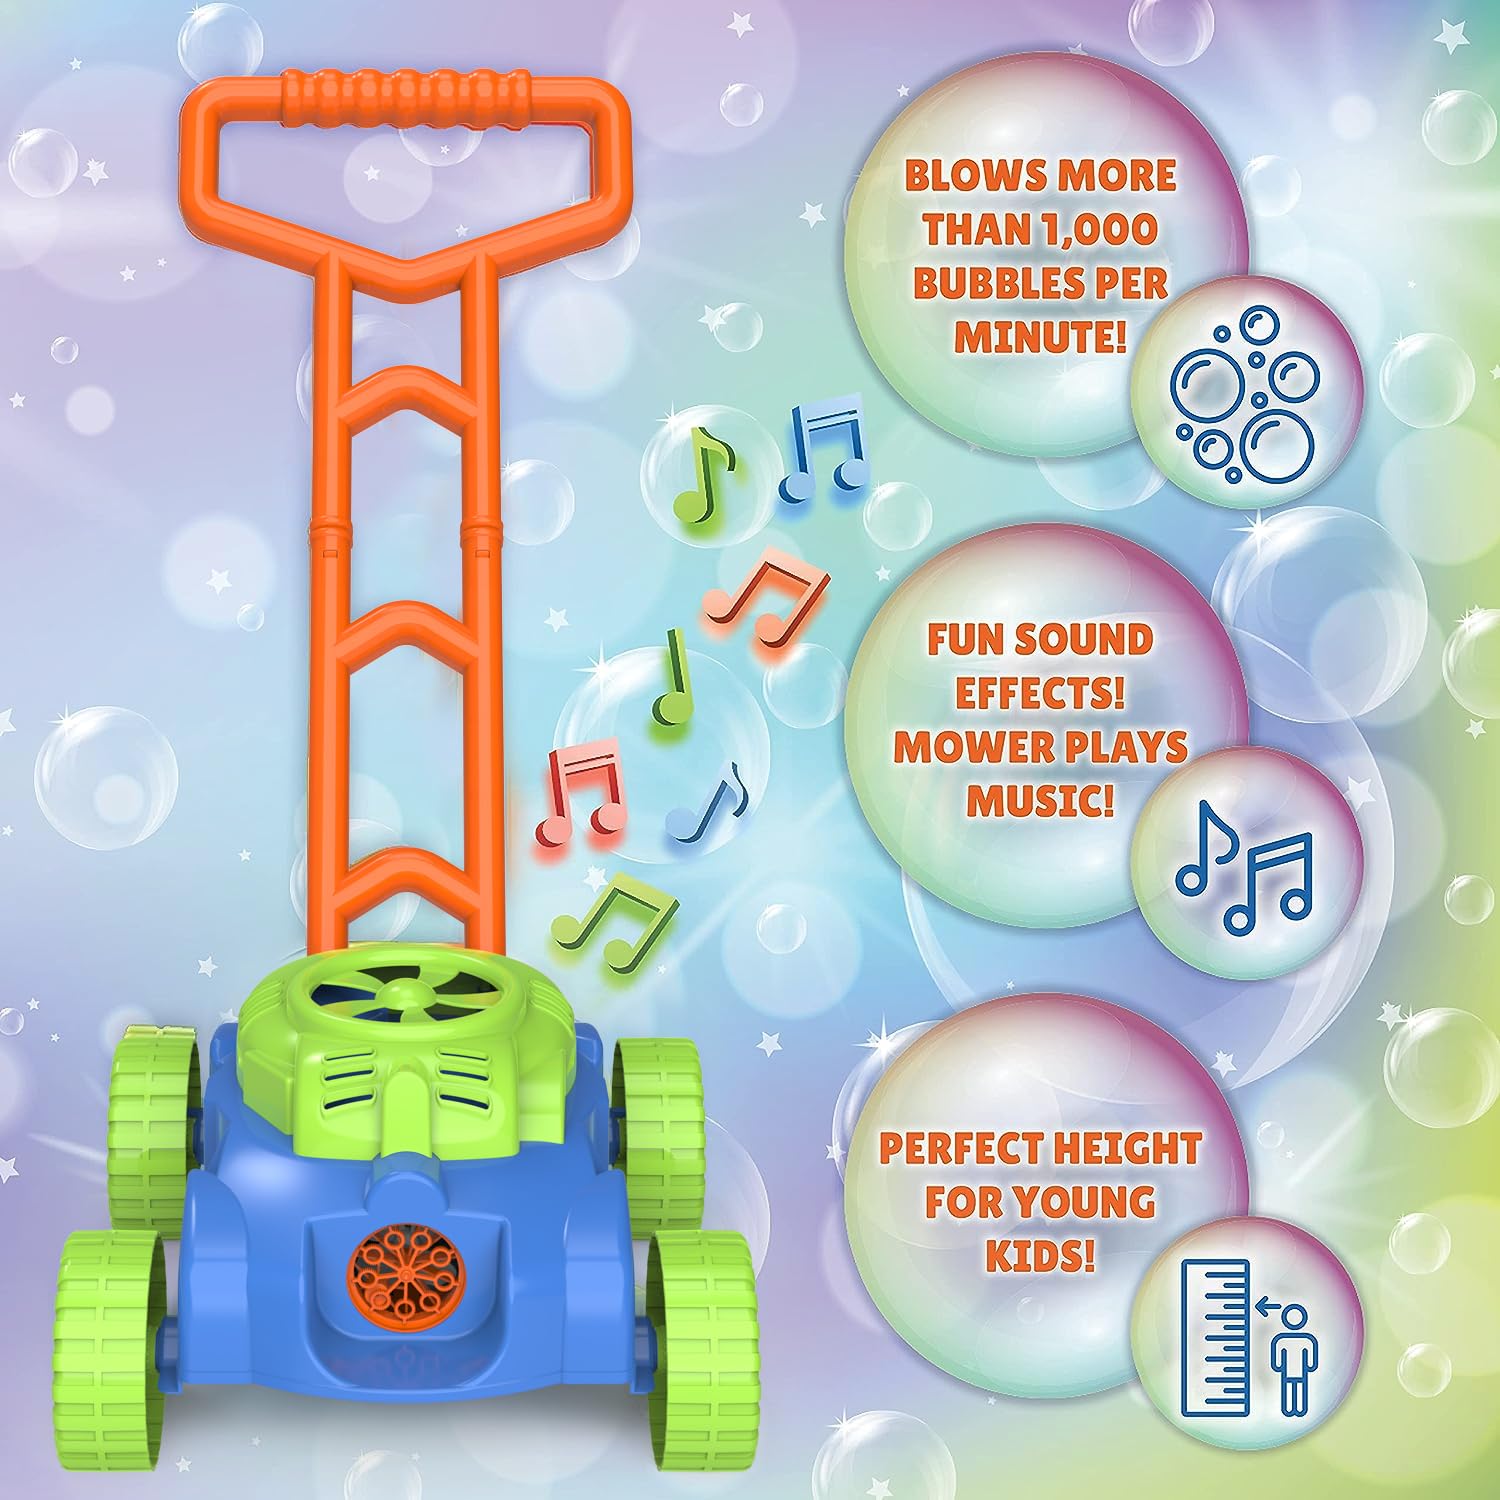 ToyVelt Bubble Lawn Mower for Kids - Automatic Bubble Mower with Music Sounds Best Toddler Boy Toys for Kids Lawn Mower Sports & Outdoor Play Toys for Boys & Girls Ages 3-12 Years Old  - Like New